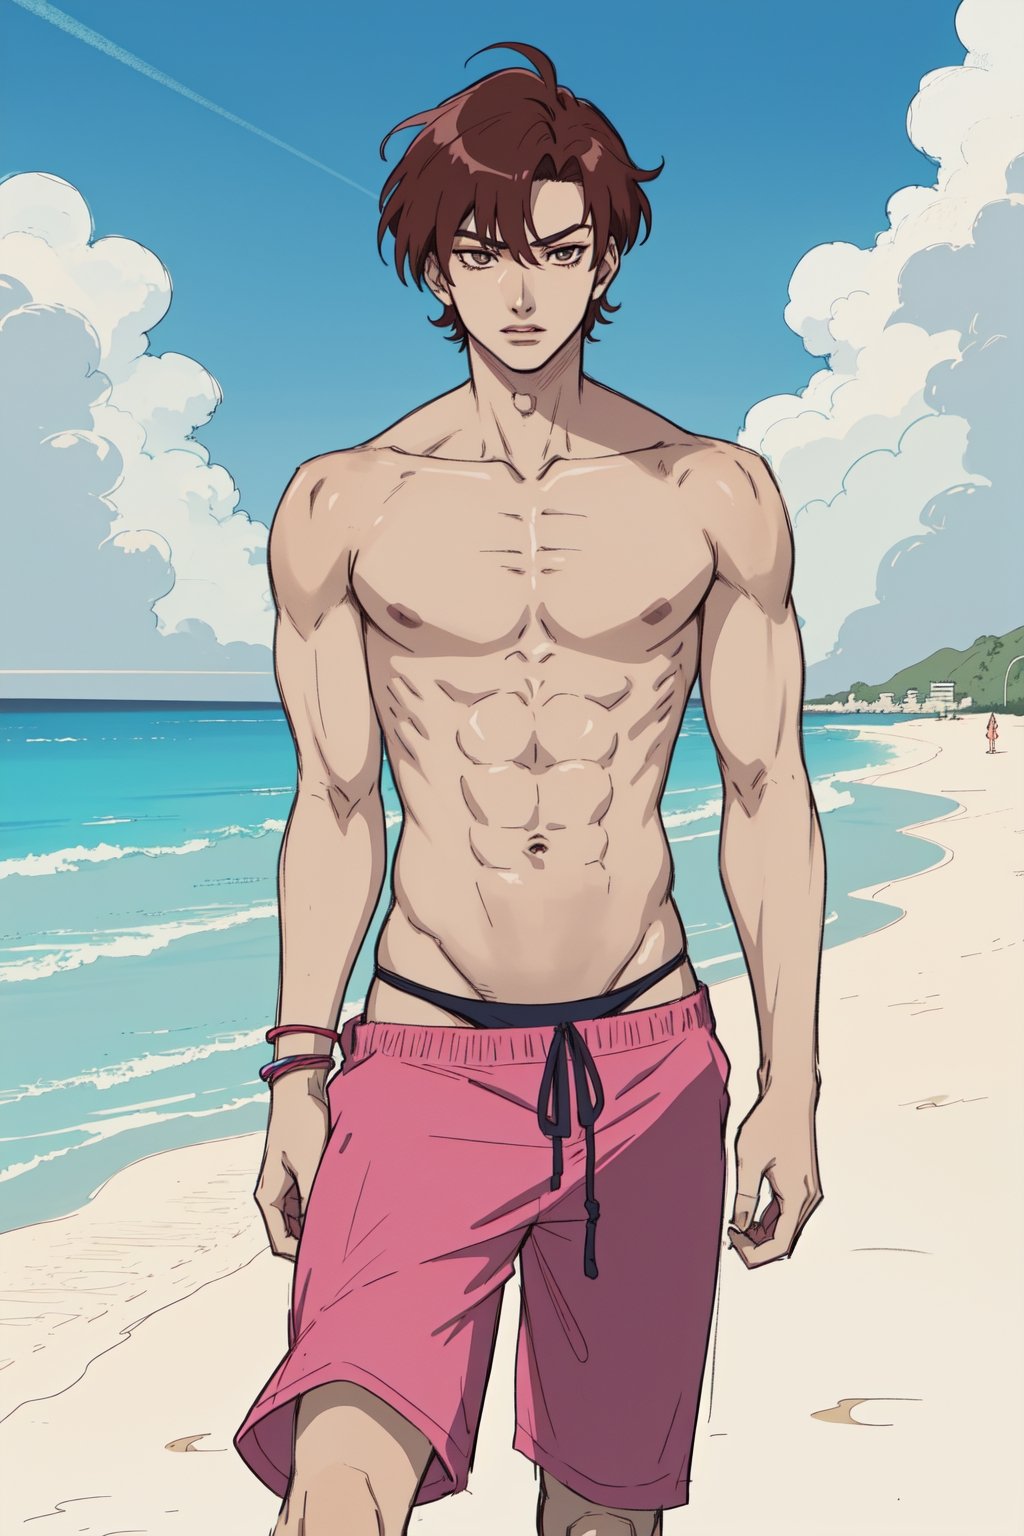   (solo), jungkook, anime, anime style, male, man, 1_boy, slim, slim body, young guy, thin body, small body, thin, sexy_pose, character sketch, beachwear, beach, playing, big_muscle